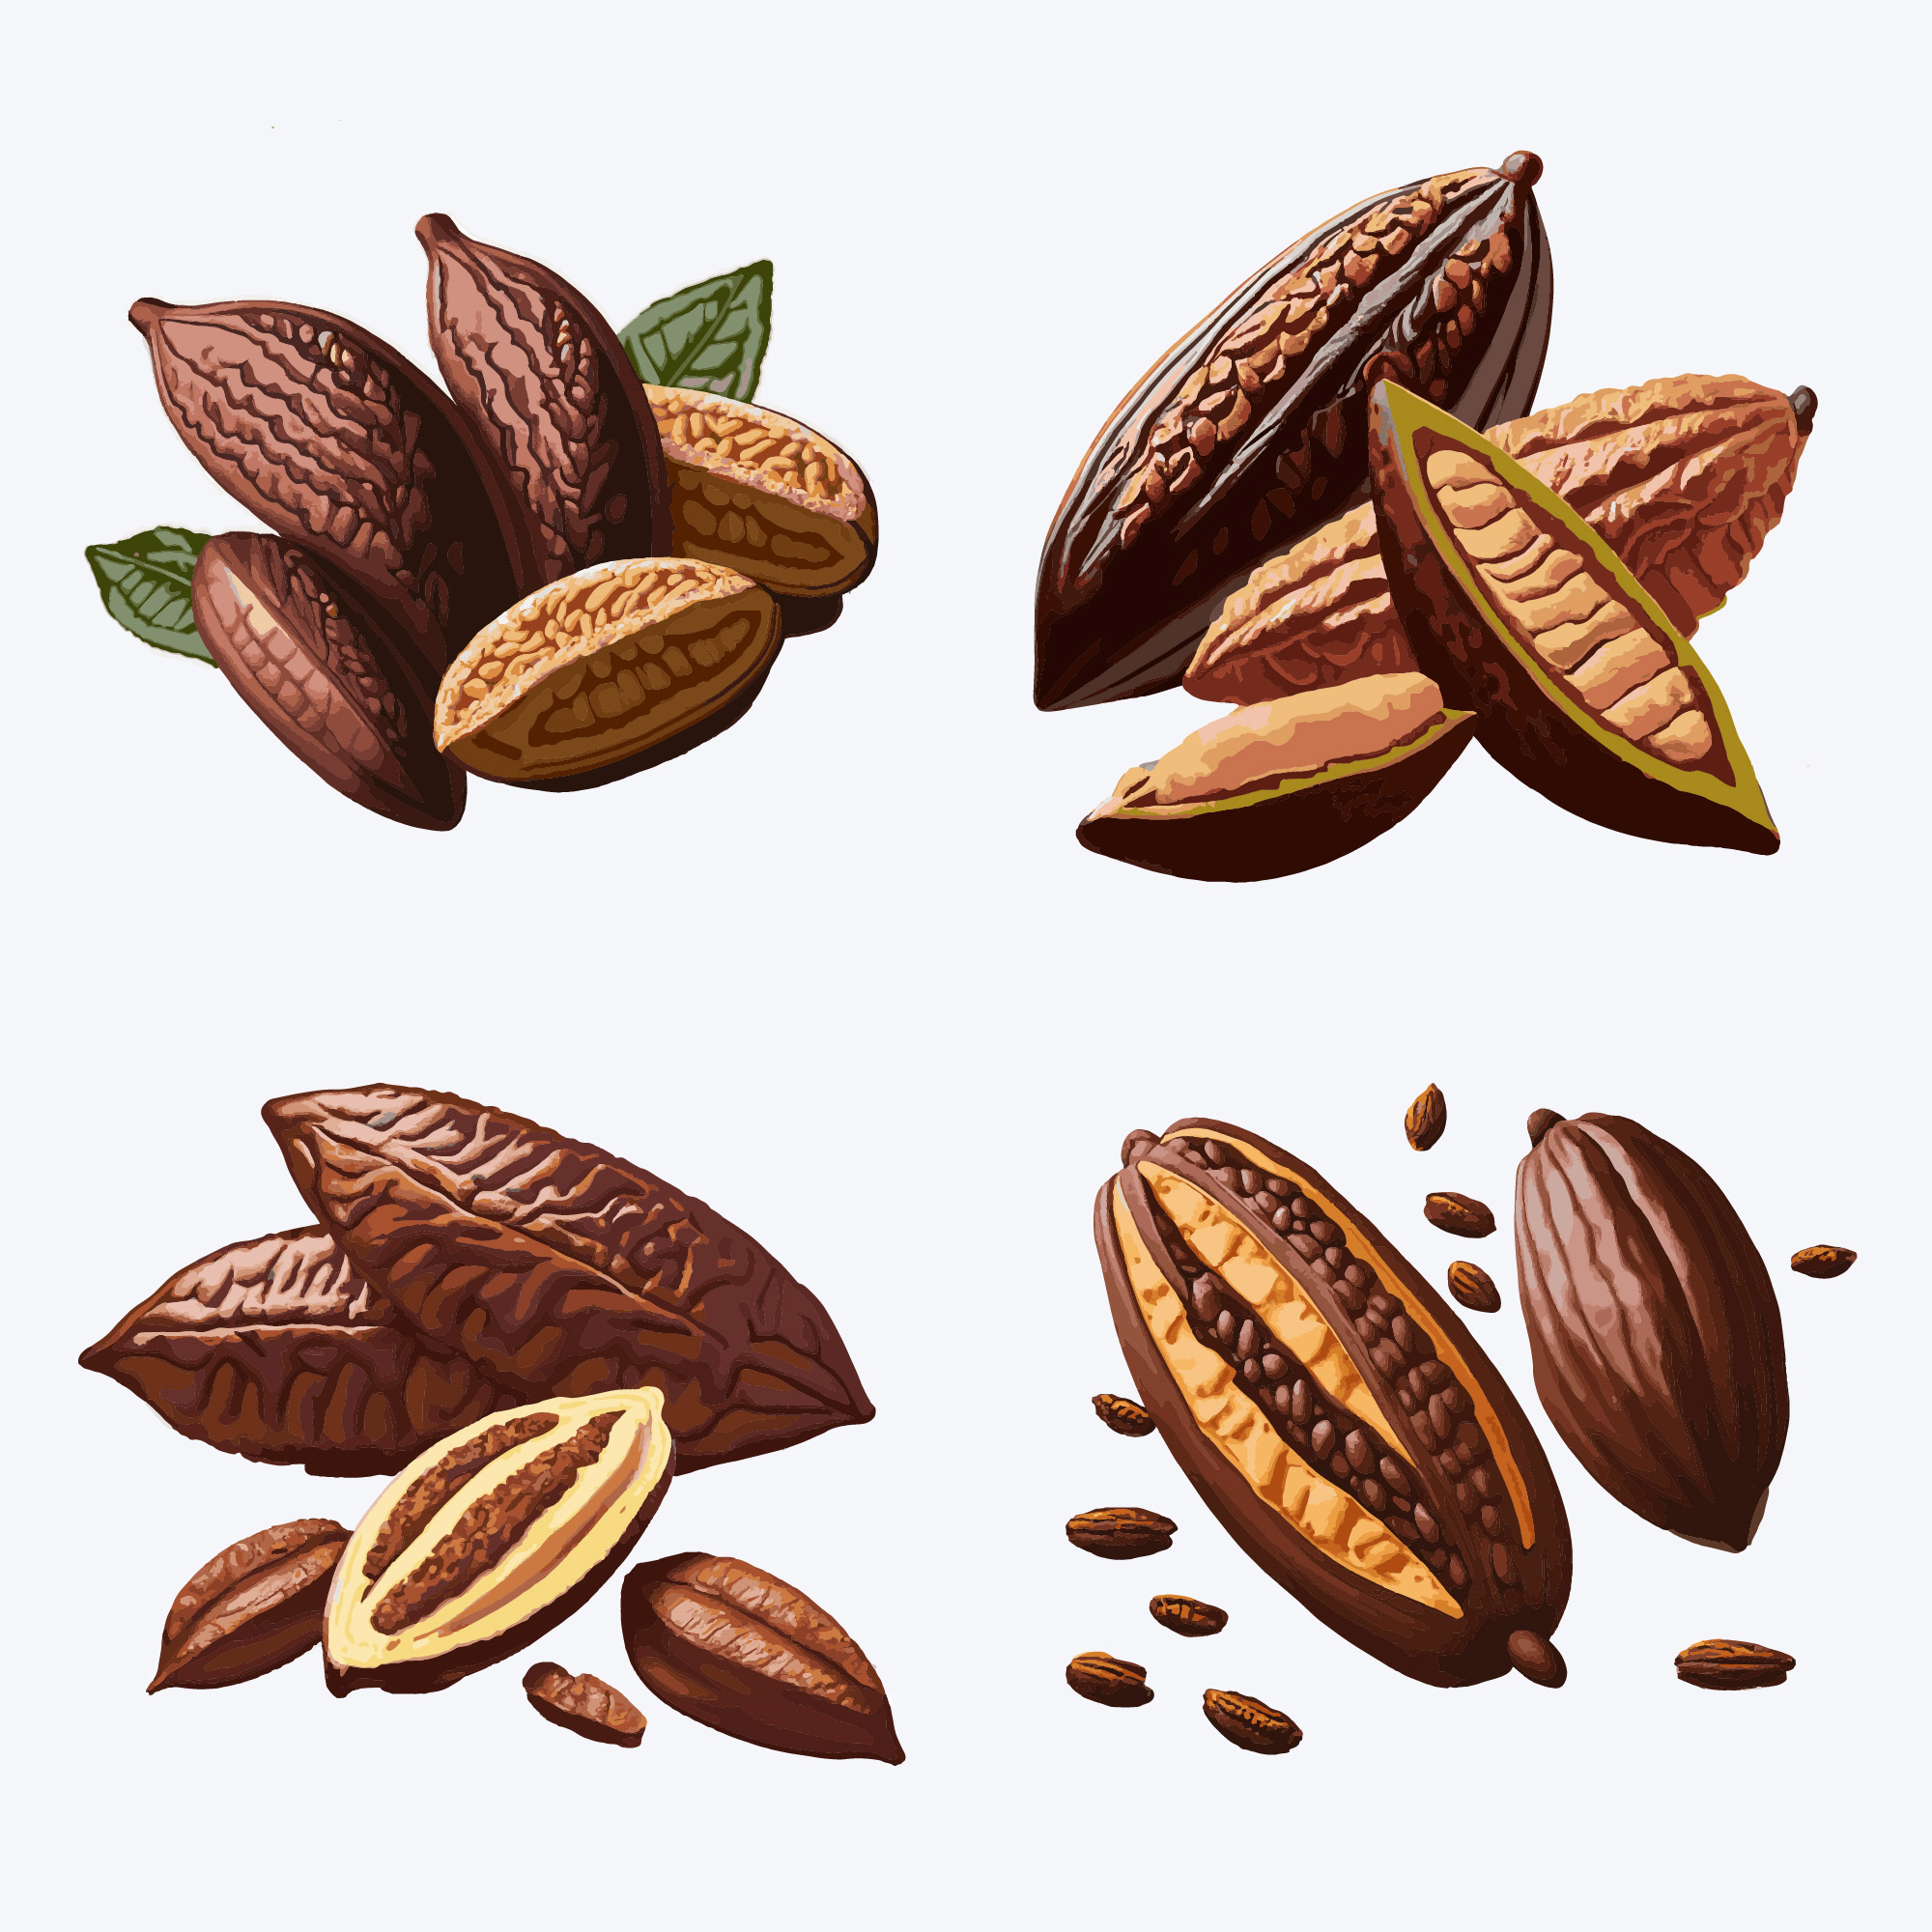 cocoa beans with leaves and seeds. vector illustration of cocoa beans 213